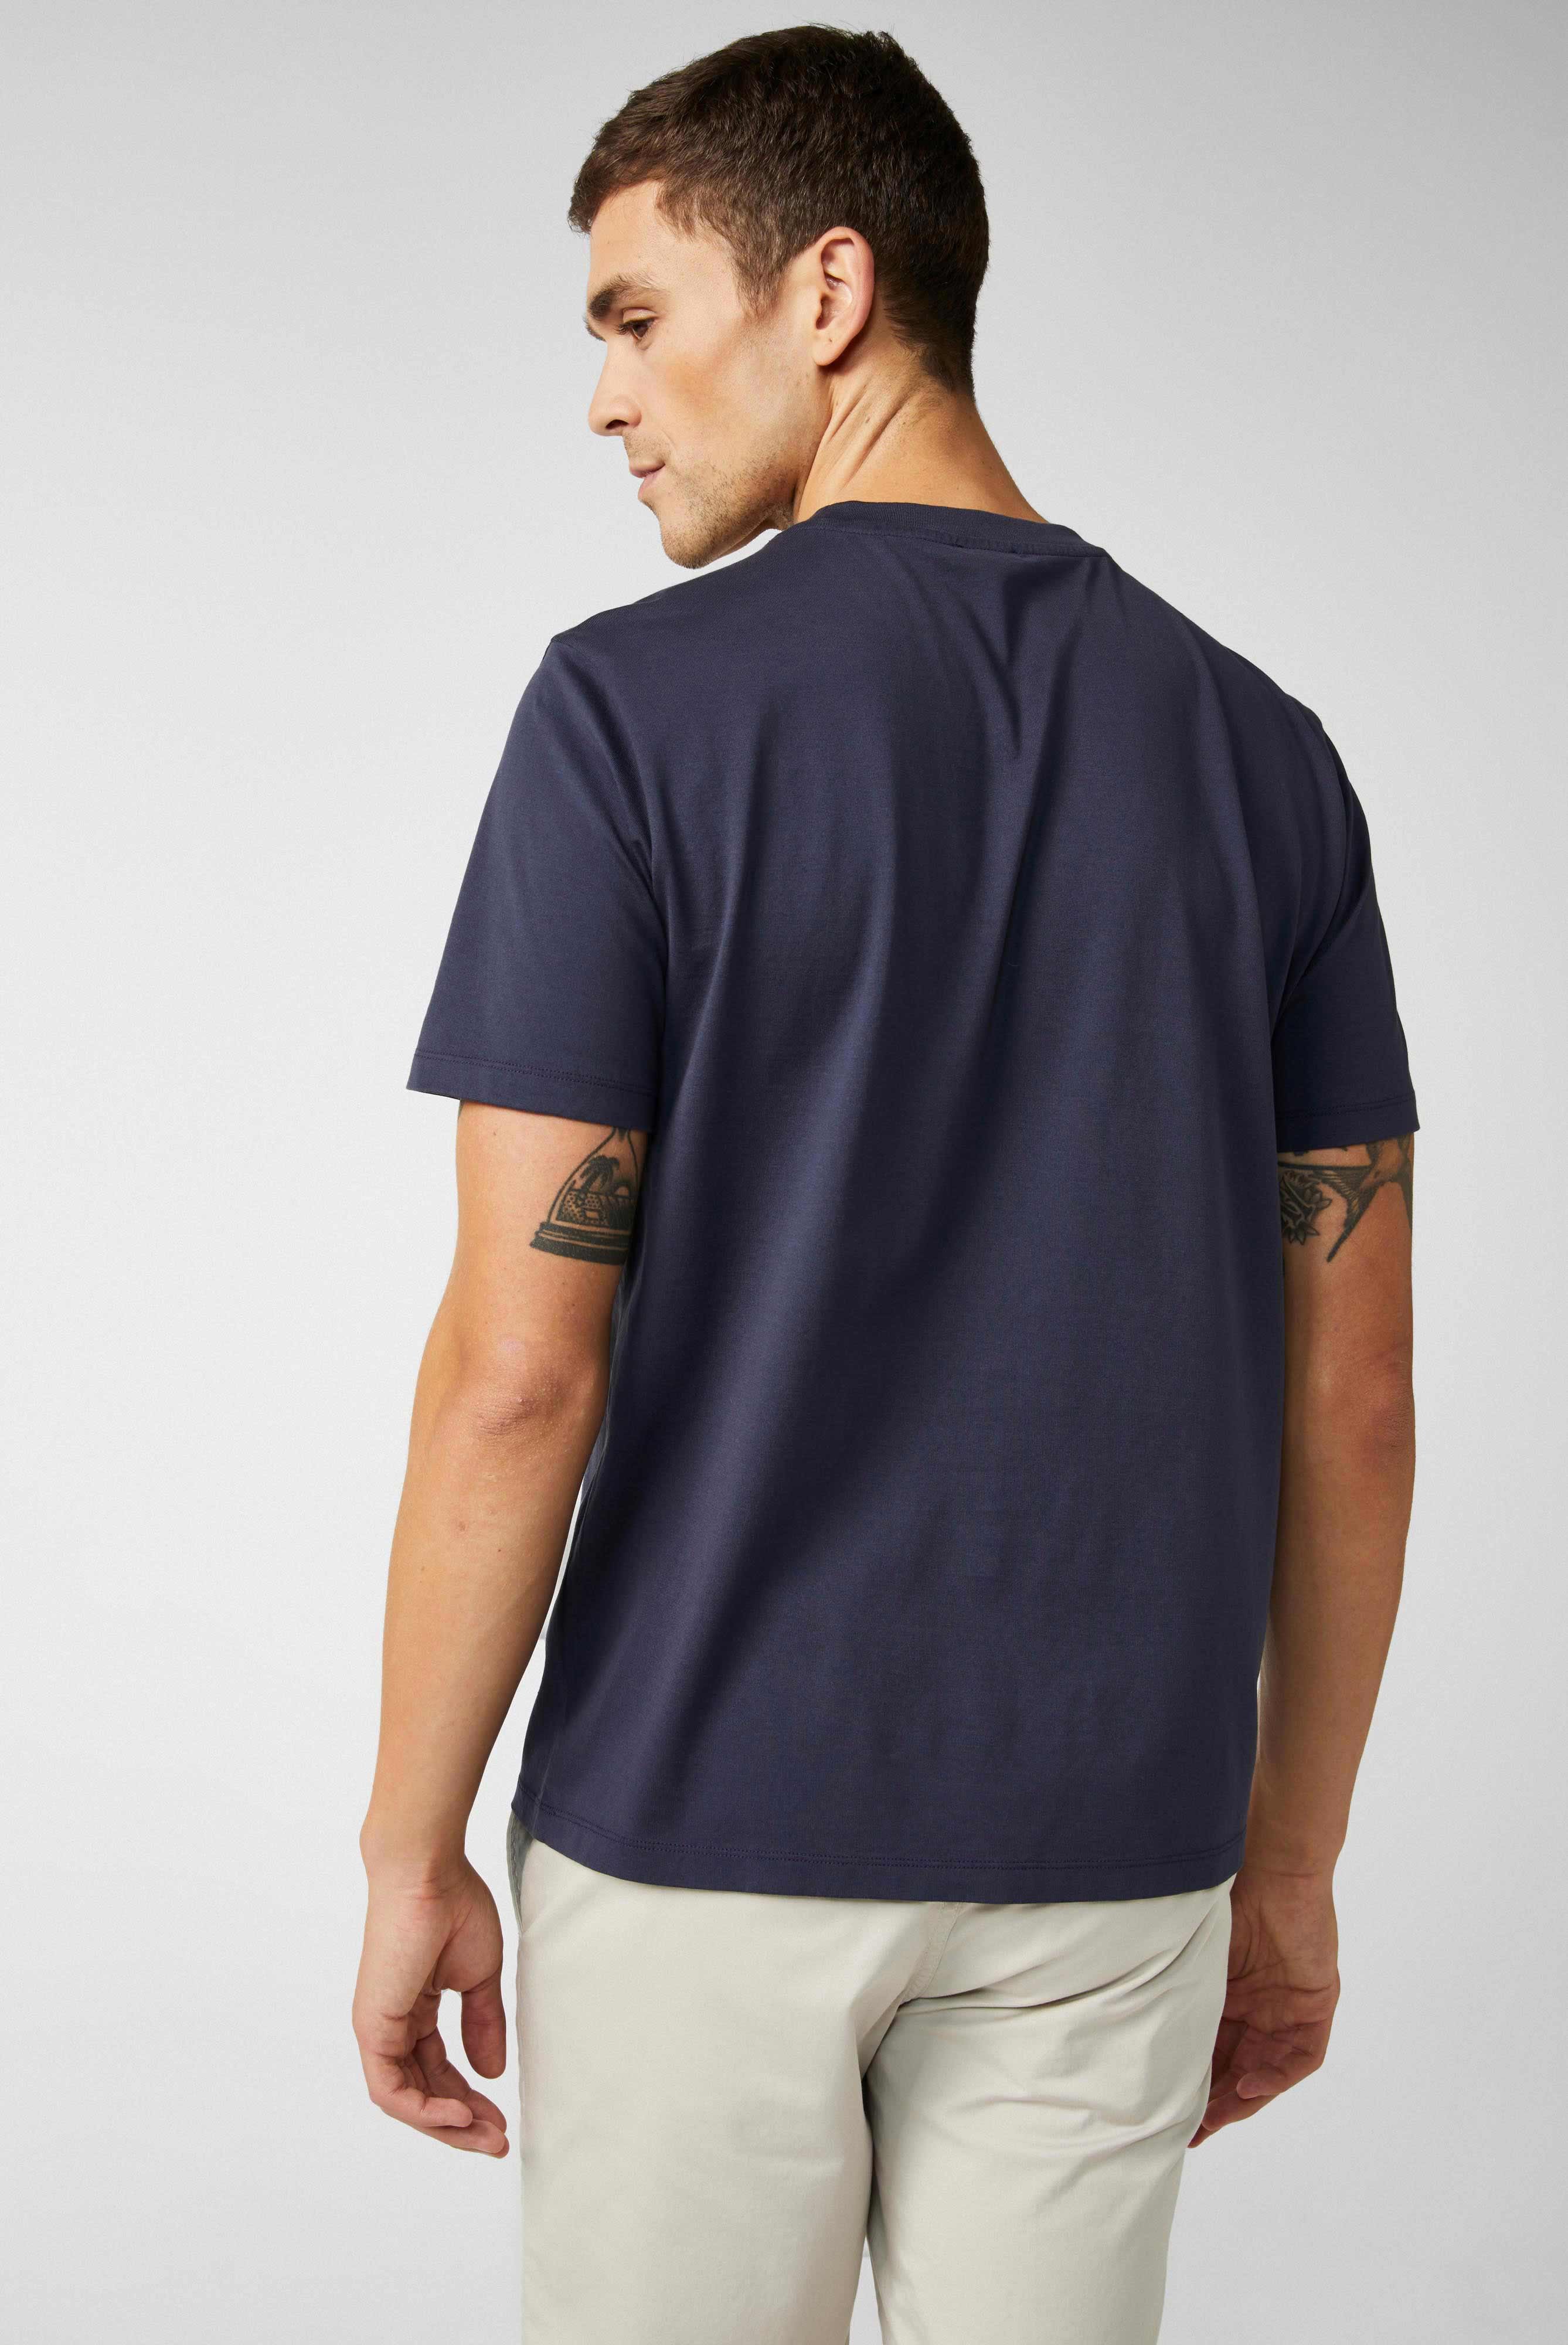 T-Shirts+Relaxed Fit Crew Neck Jersey T-Shirt+20.1660..Z20044.790.XXL